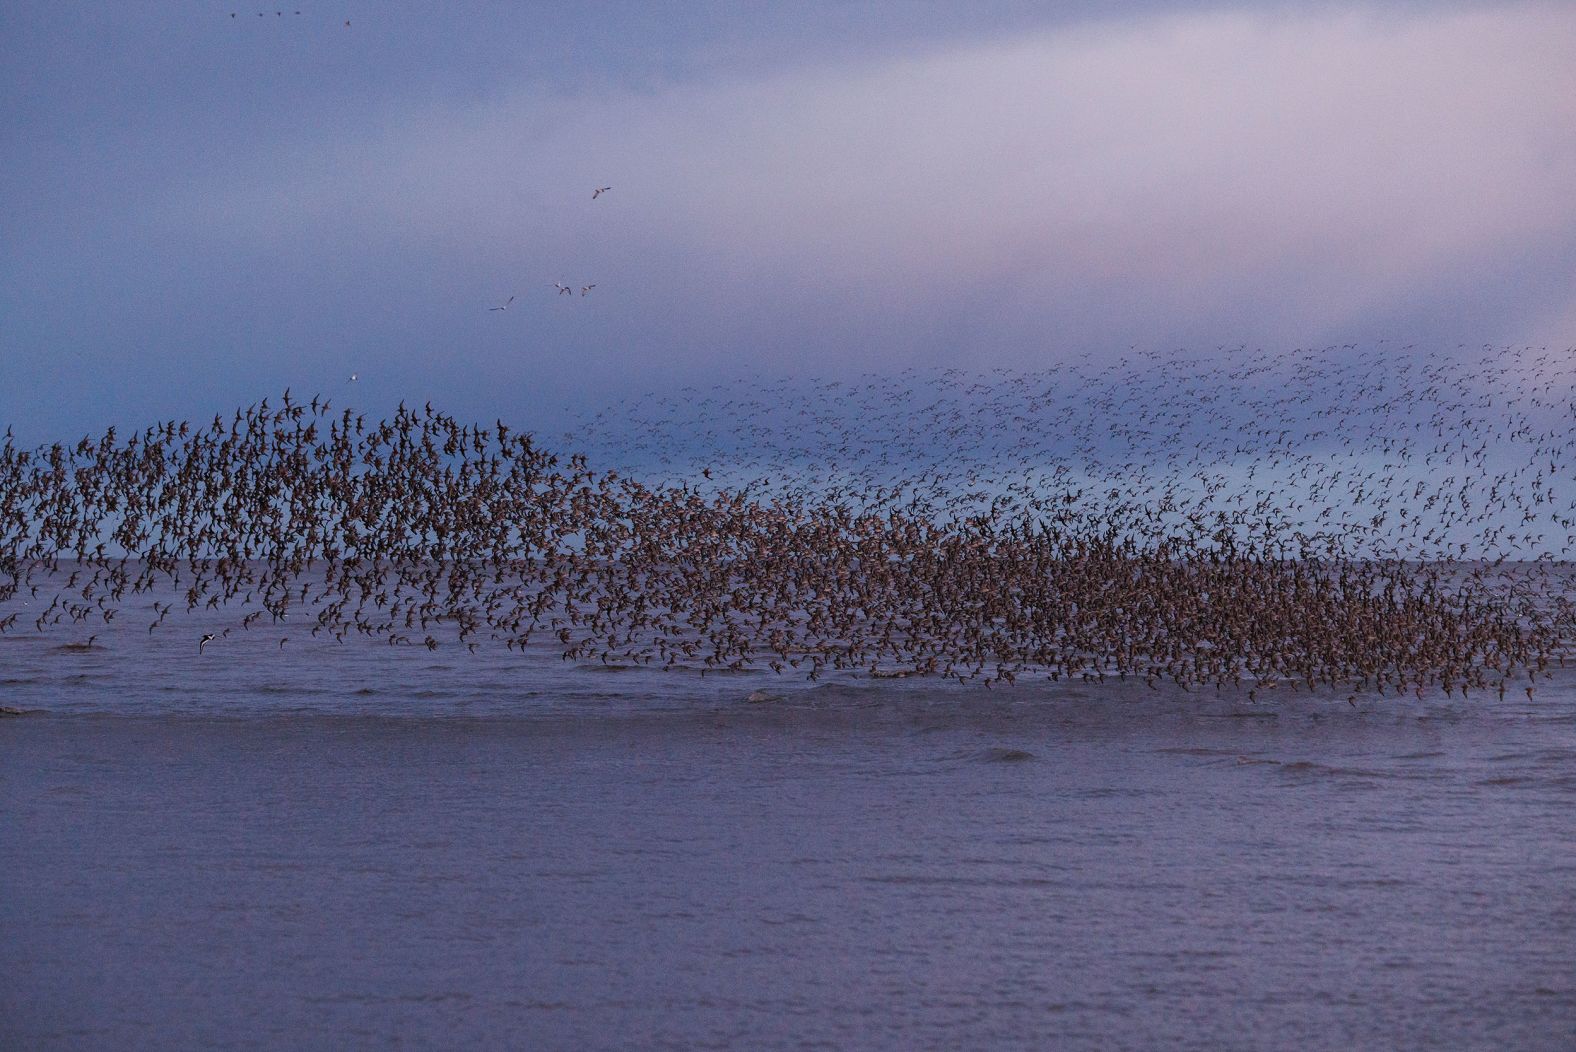 Birds flock over the water at high tide in Snettisham, England, on Monday, February 12.